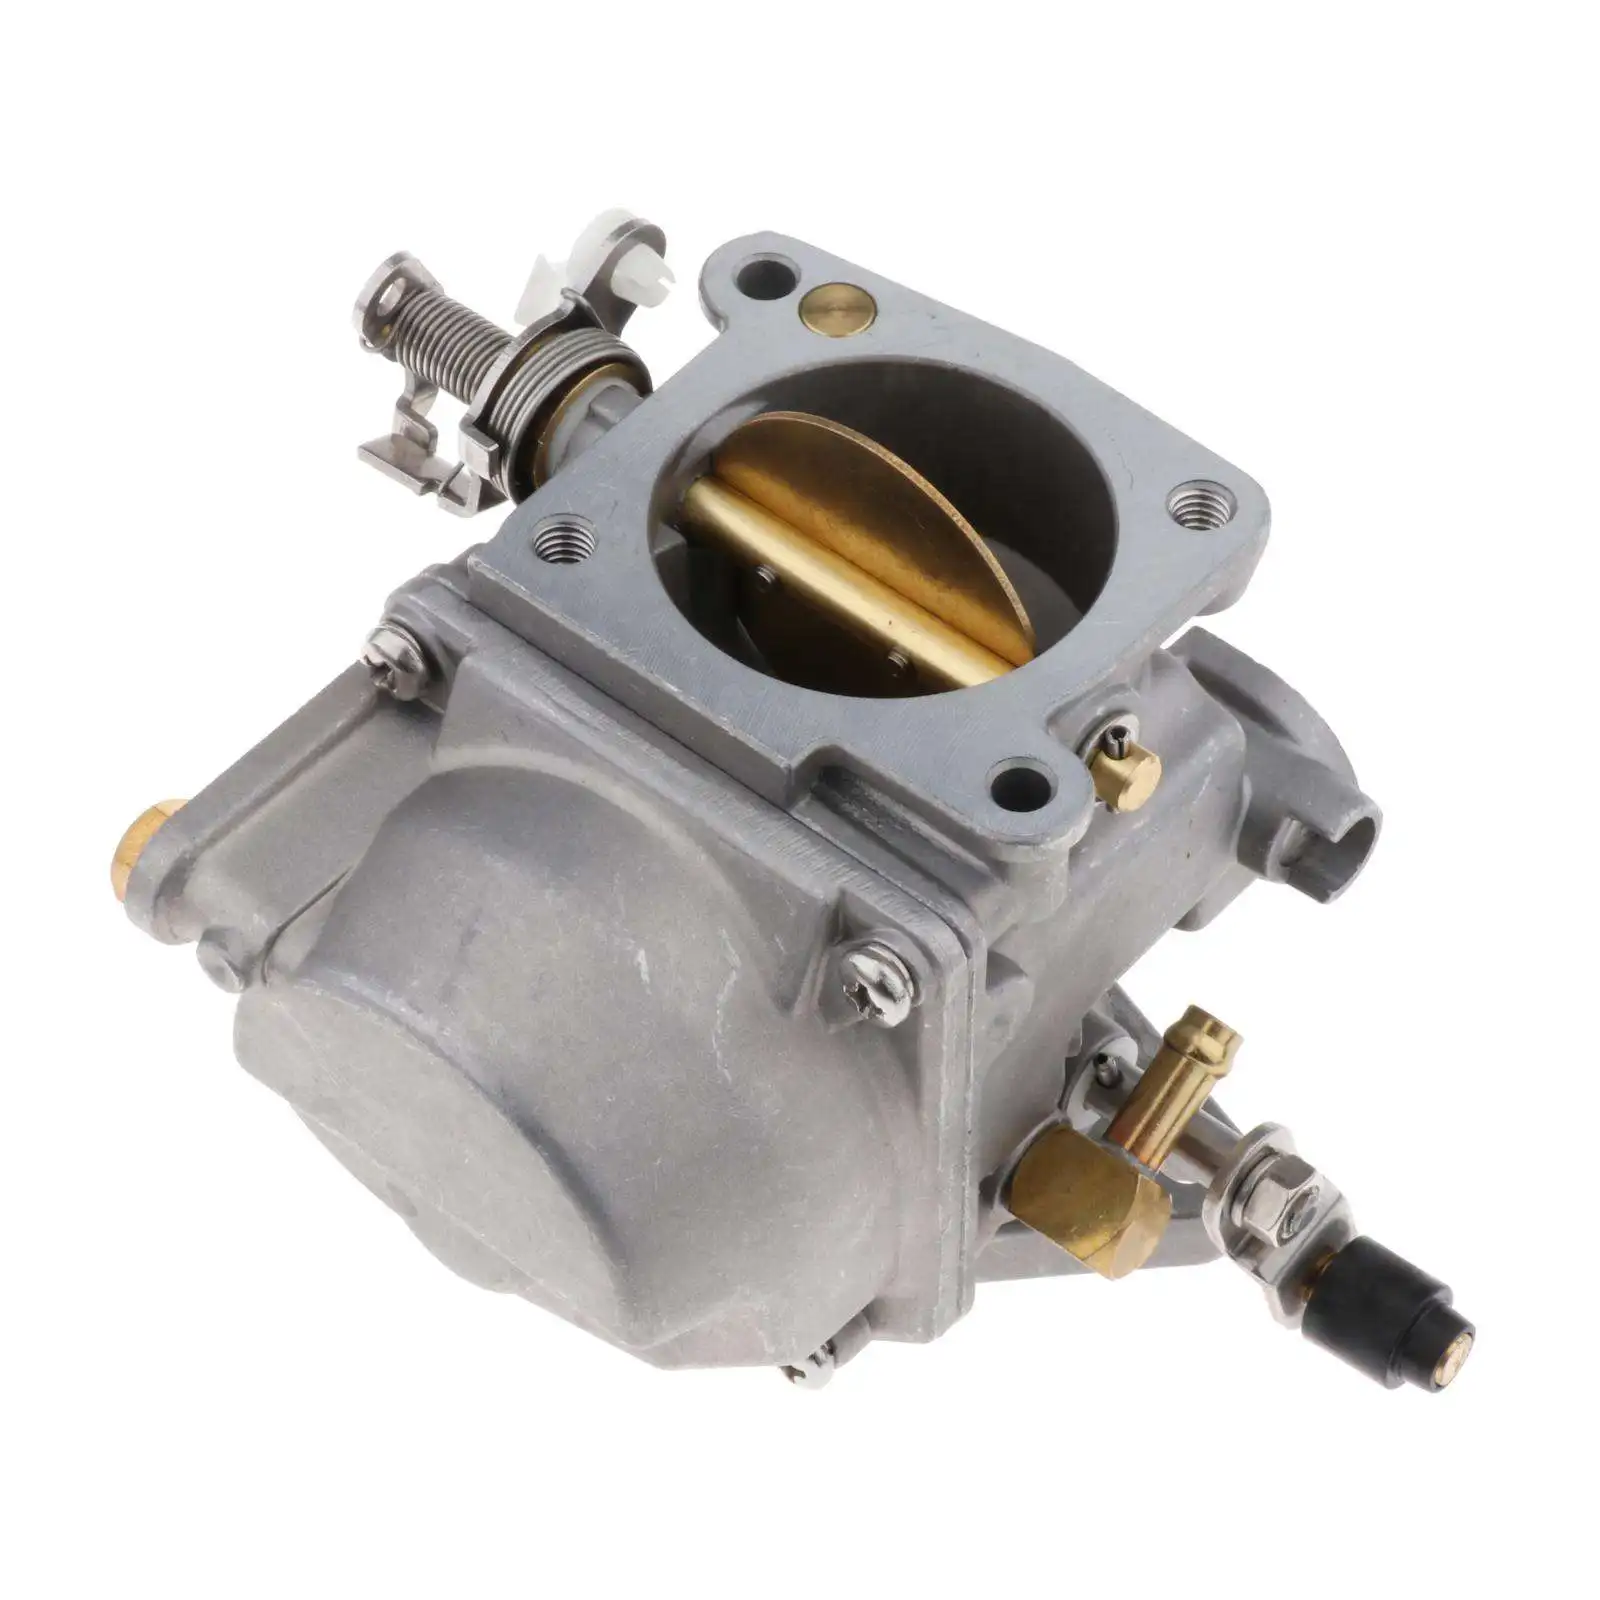 Carburetor Carb For Tohatsu Nissan 25HP M25C 30HP M30A 2-Stroke 2 Stroke Outboard Engine 3P0032000 346-03200-0 346032000M